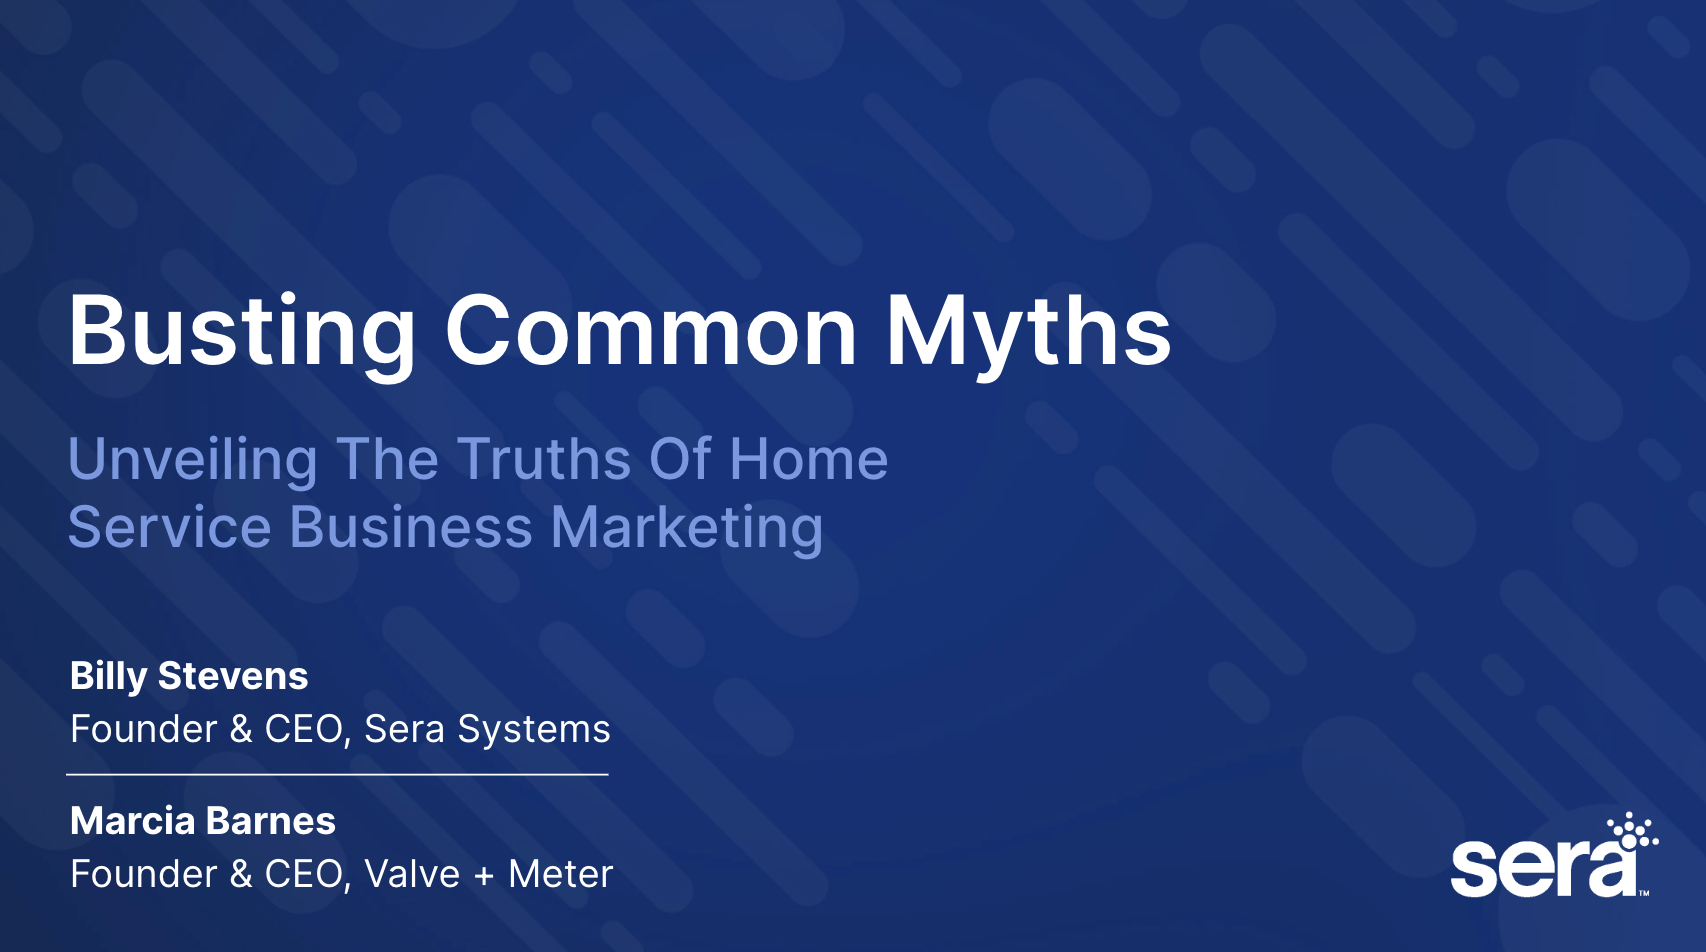 Busting Common Myths: Unveiling the Truths of Home Service Business Marketing